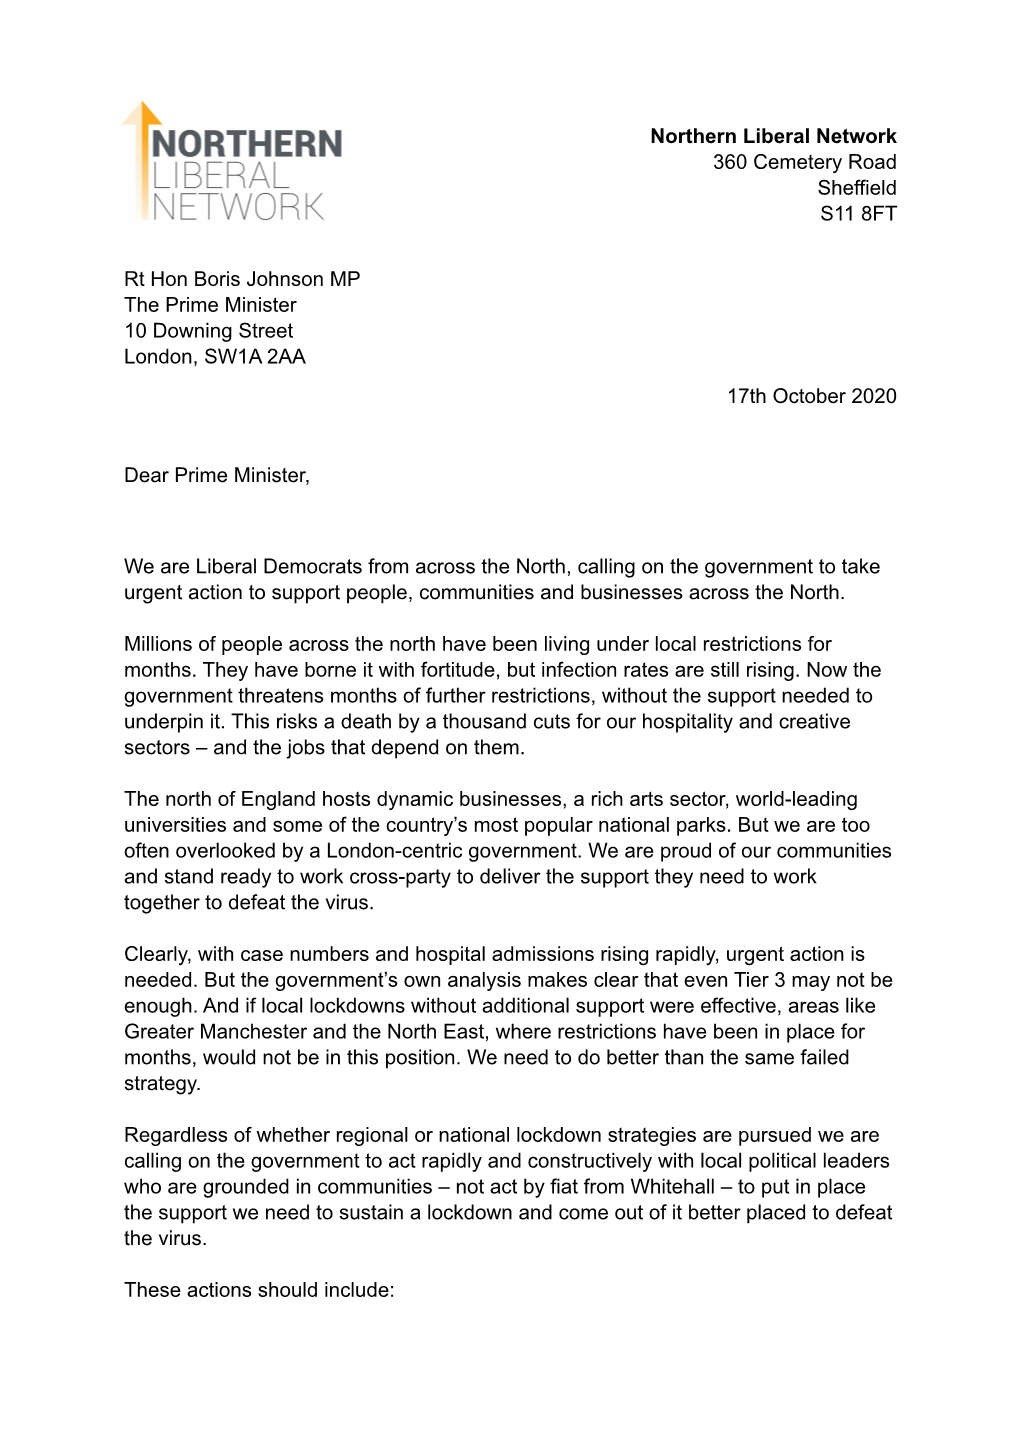 NLN Letter to PM 17.10.20